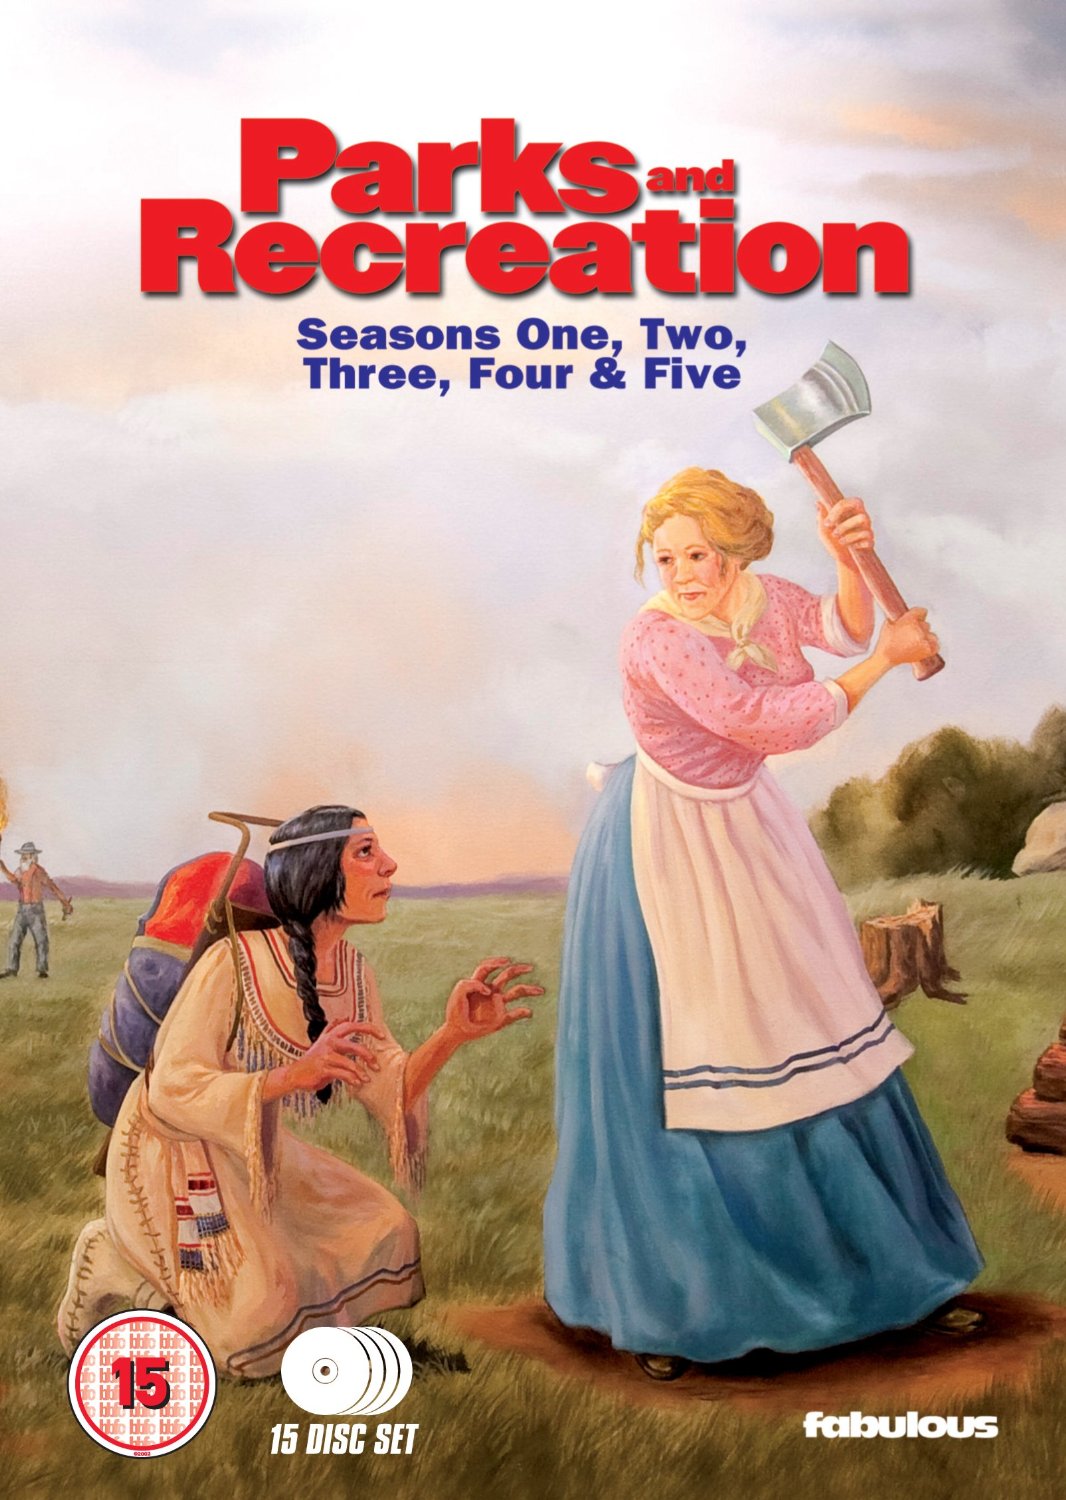 boom competitions - win a copy of Parks & Recreations seasons 1-5 on DVD